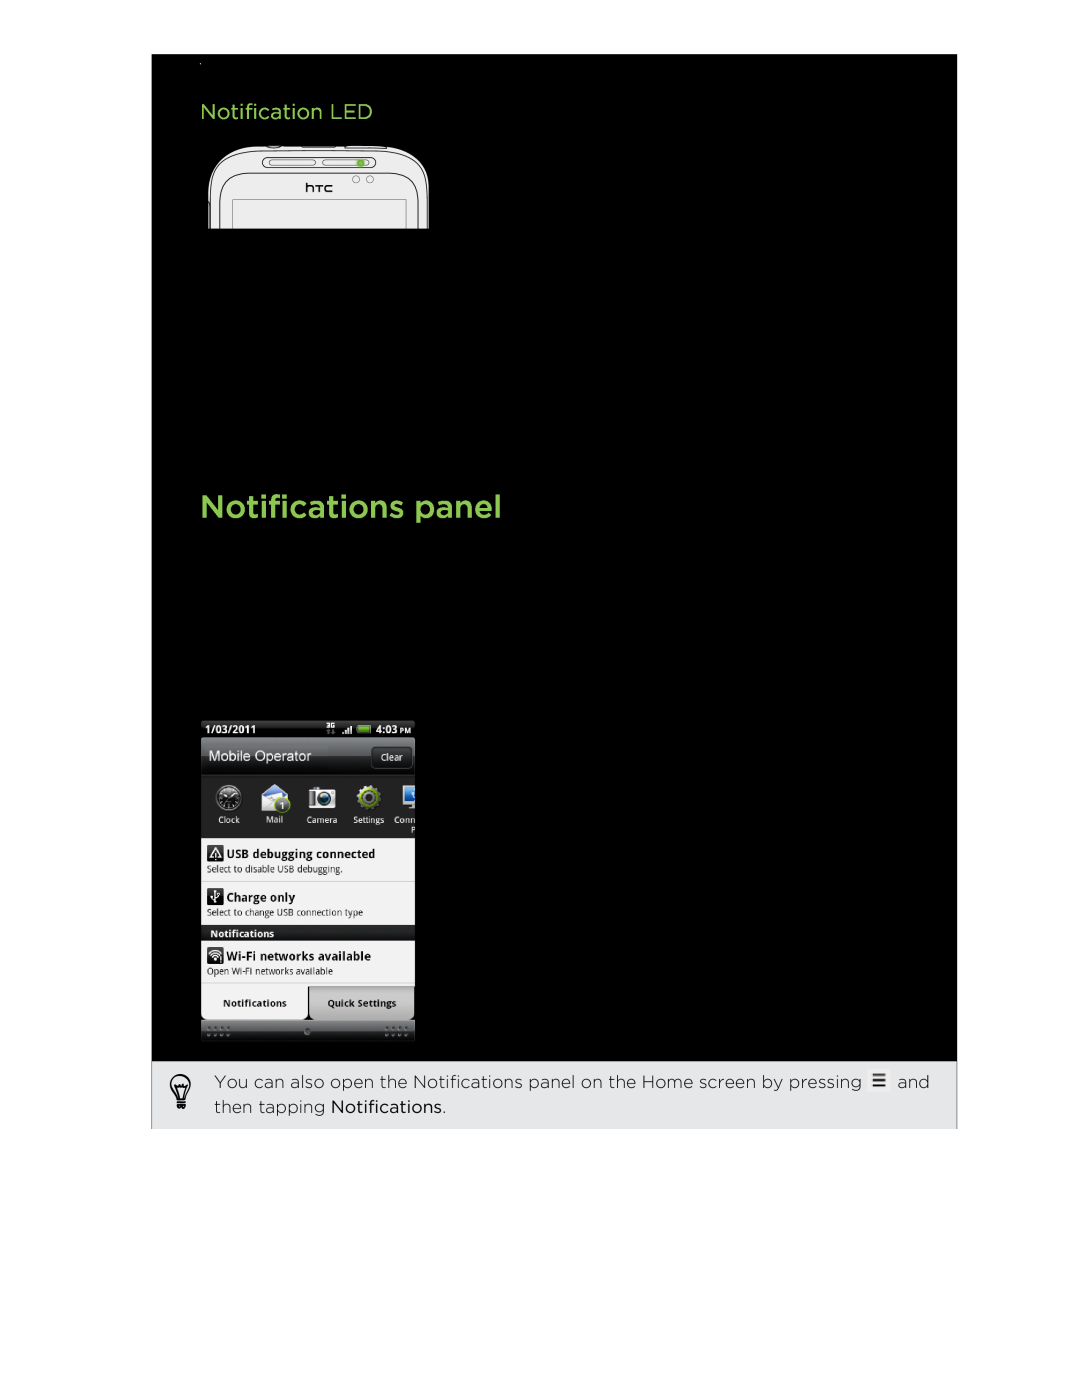 HTC S manual Notifications panel, Notification LED 